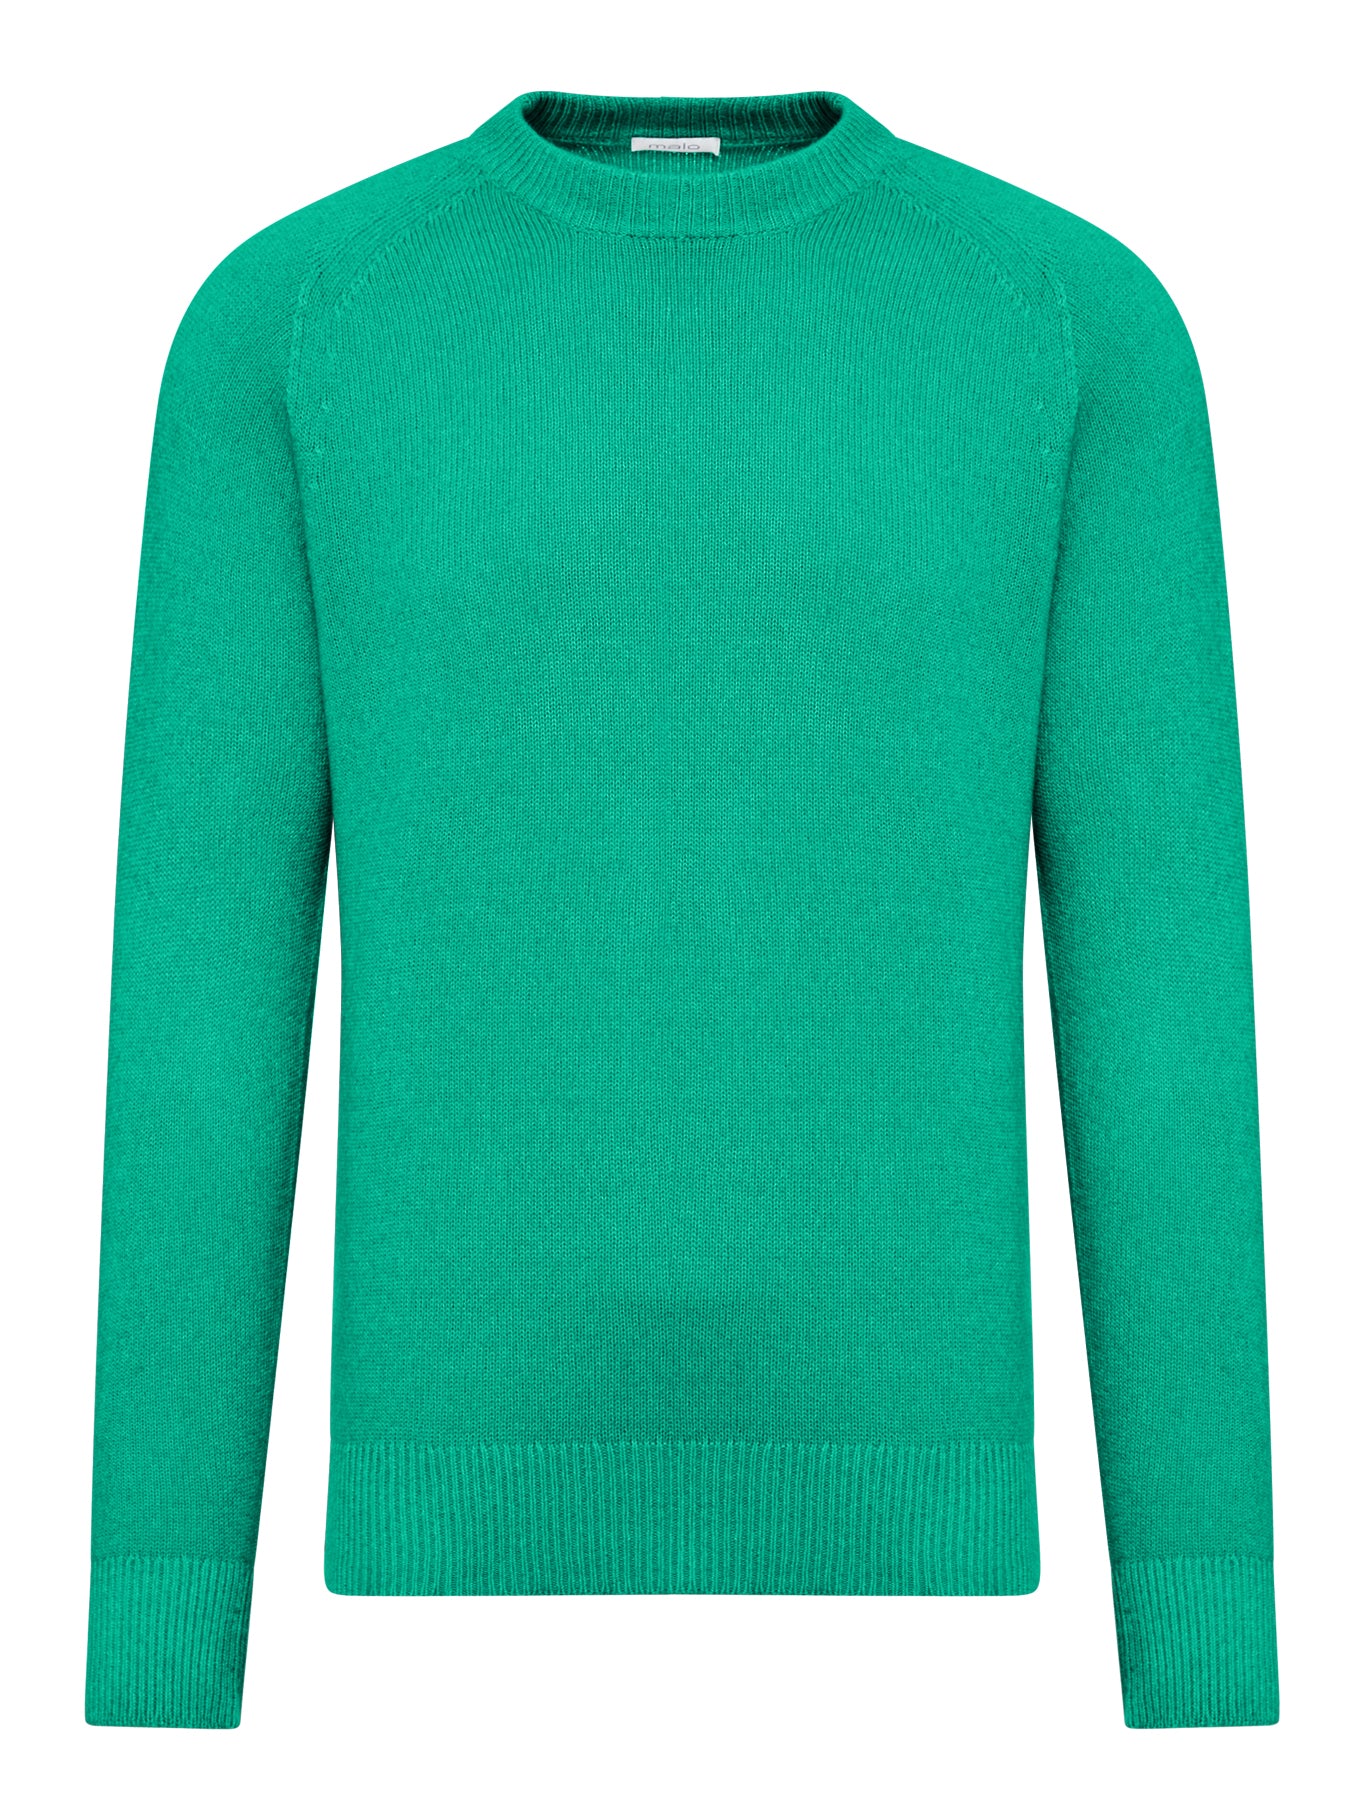 Cashmere Jumper by Malo